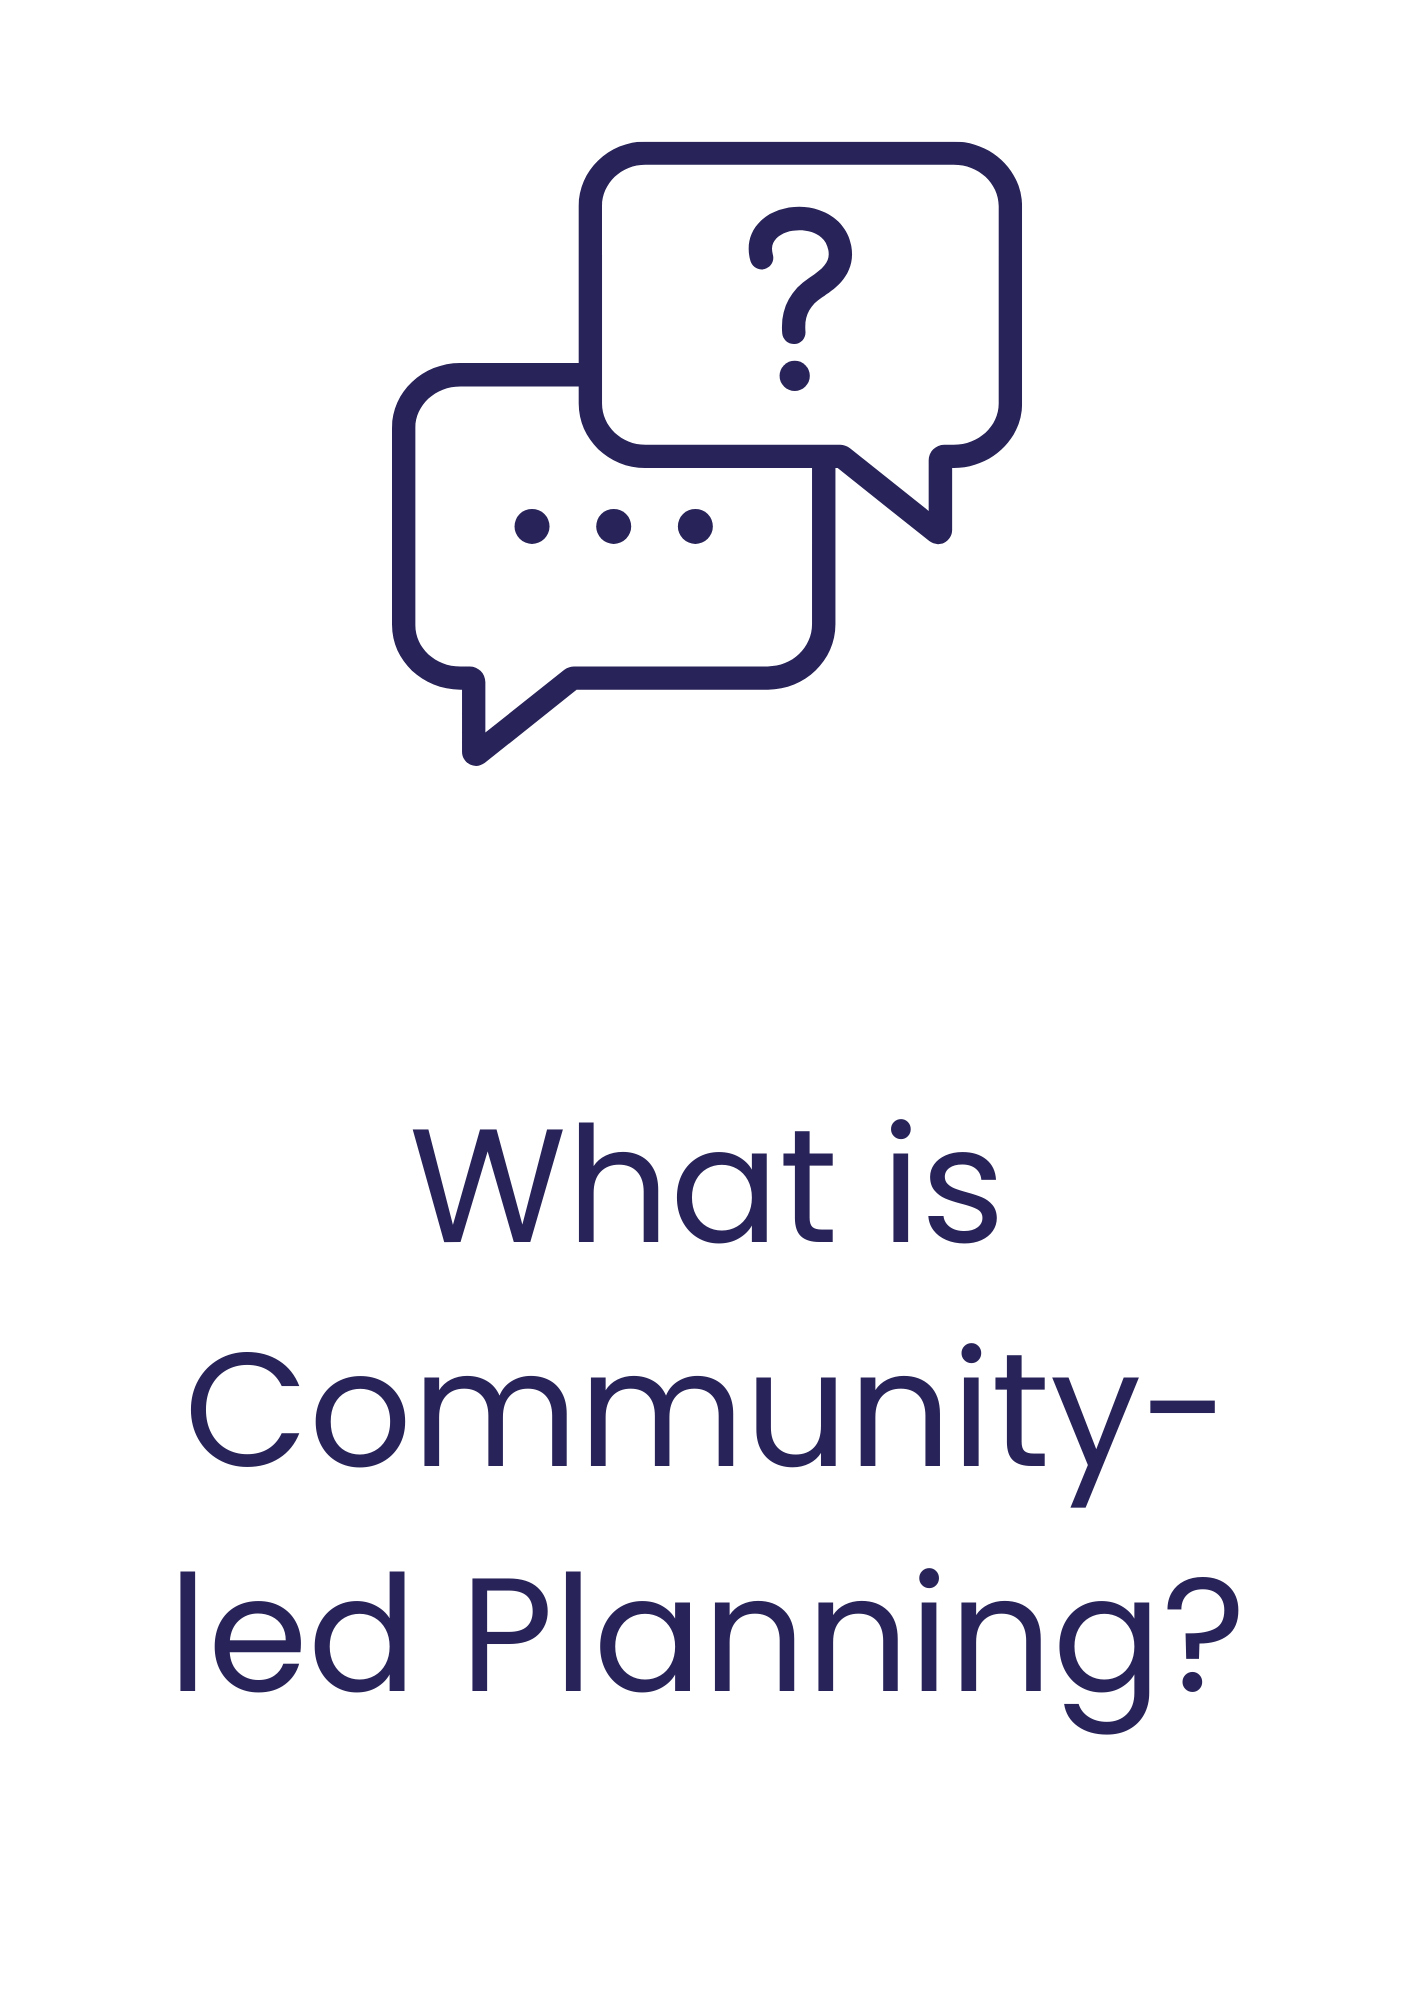 What is Community-led Planning?